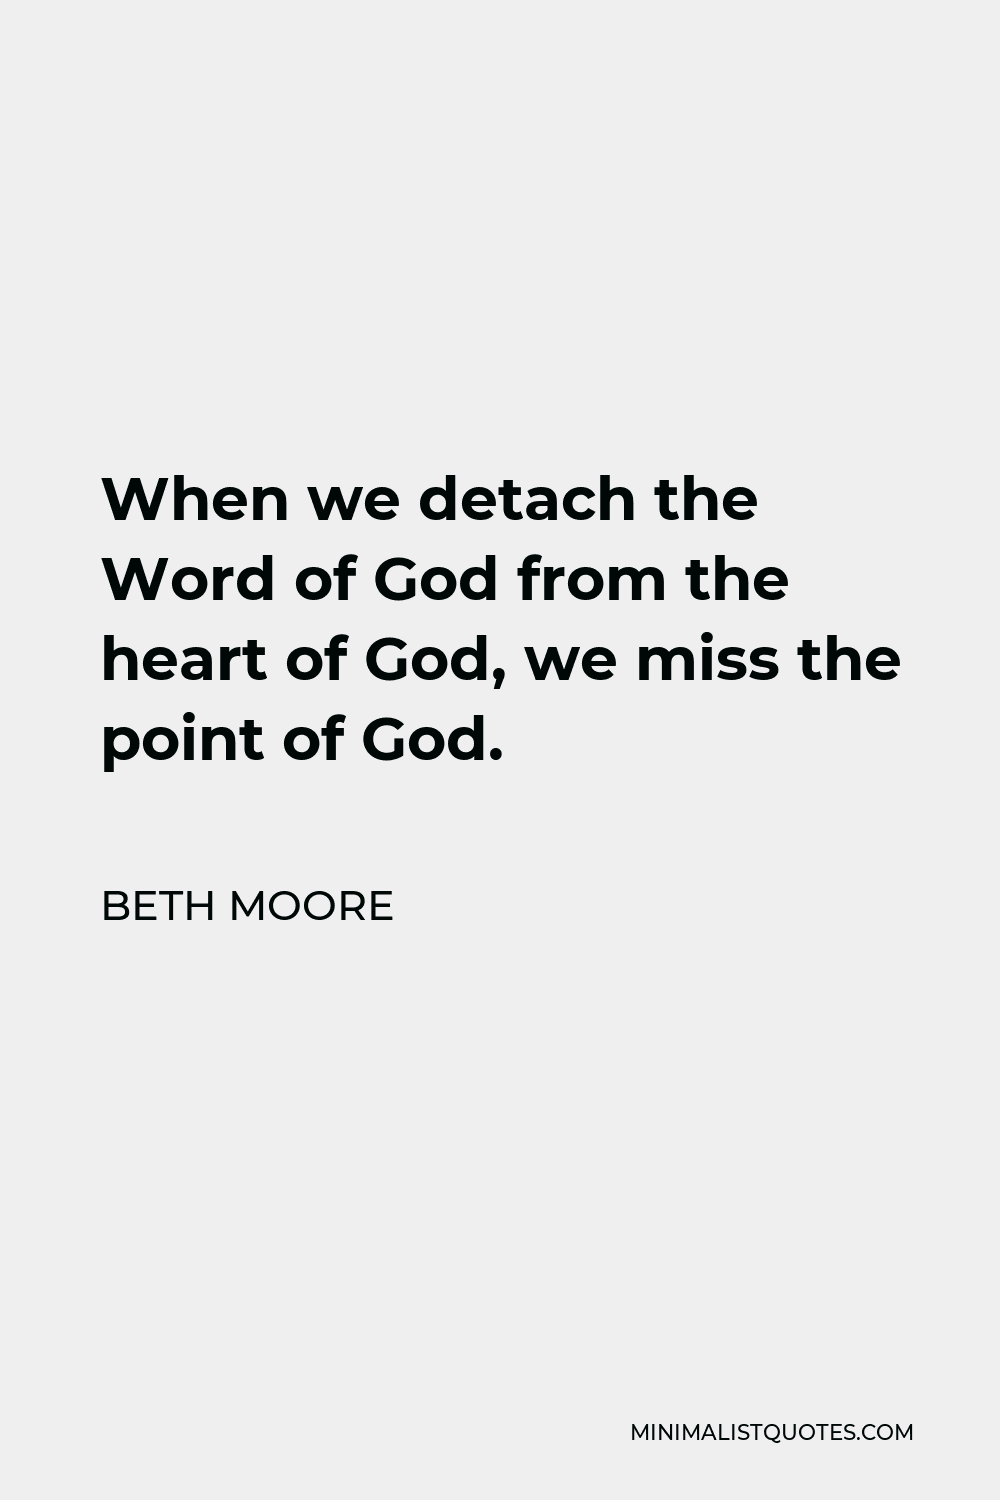 Beth Moore Quote - When we detach the Word of God from the heart of God, we miss the point of God.